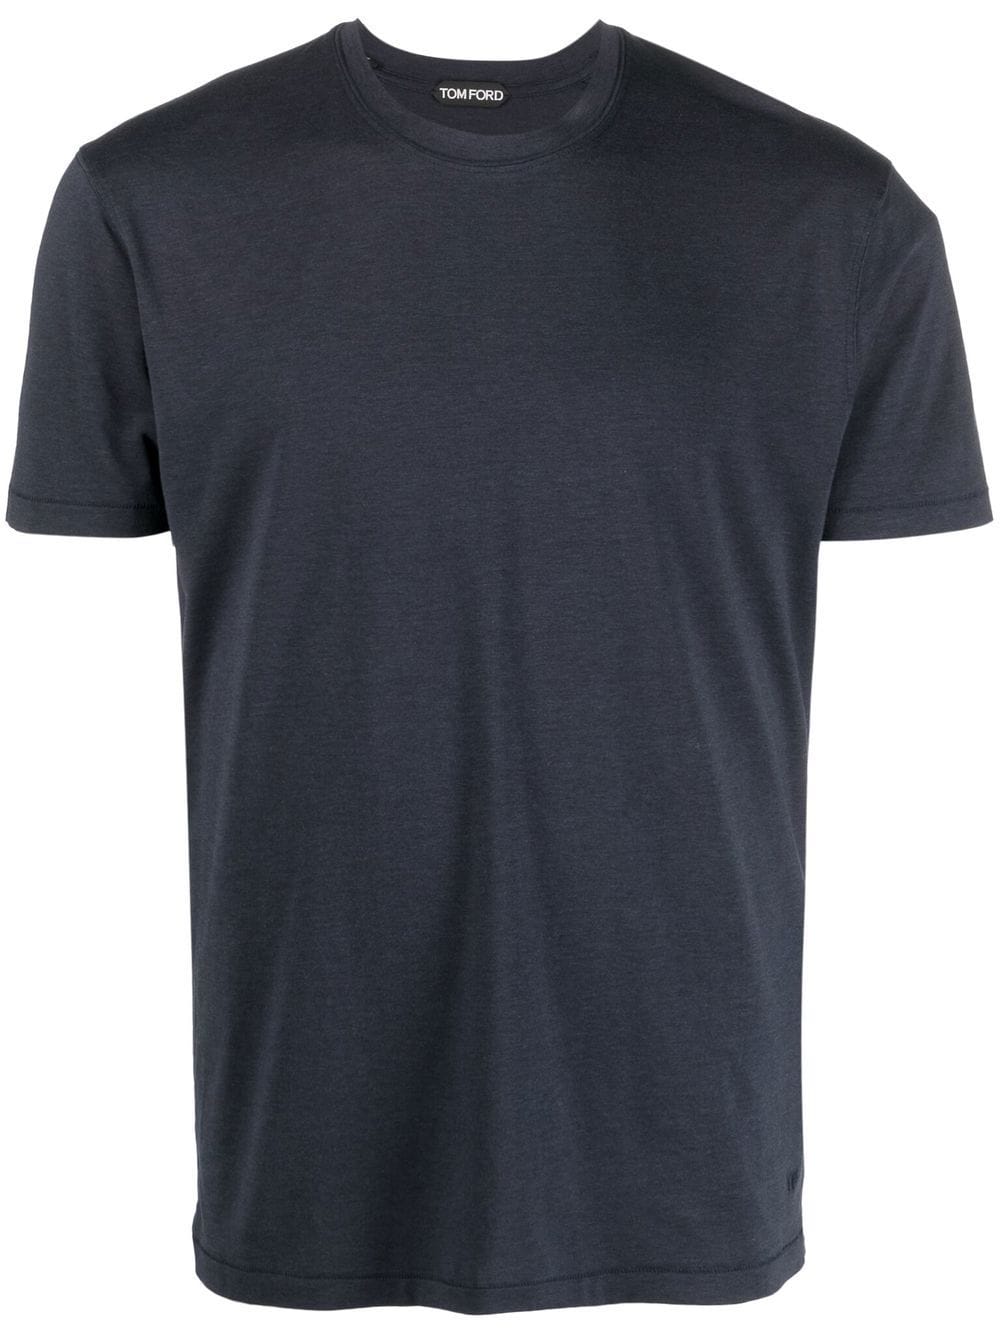 Image 1 of TOM FORD short-sleeve T-shirt